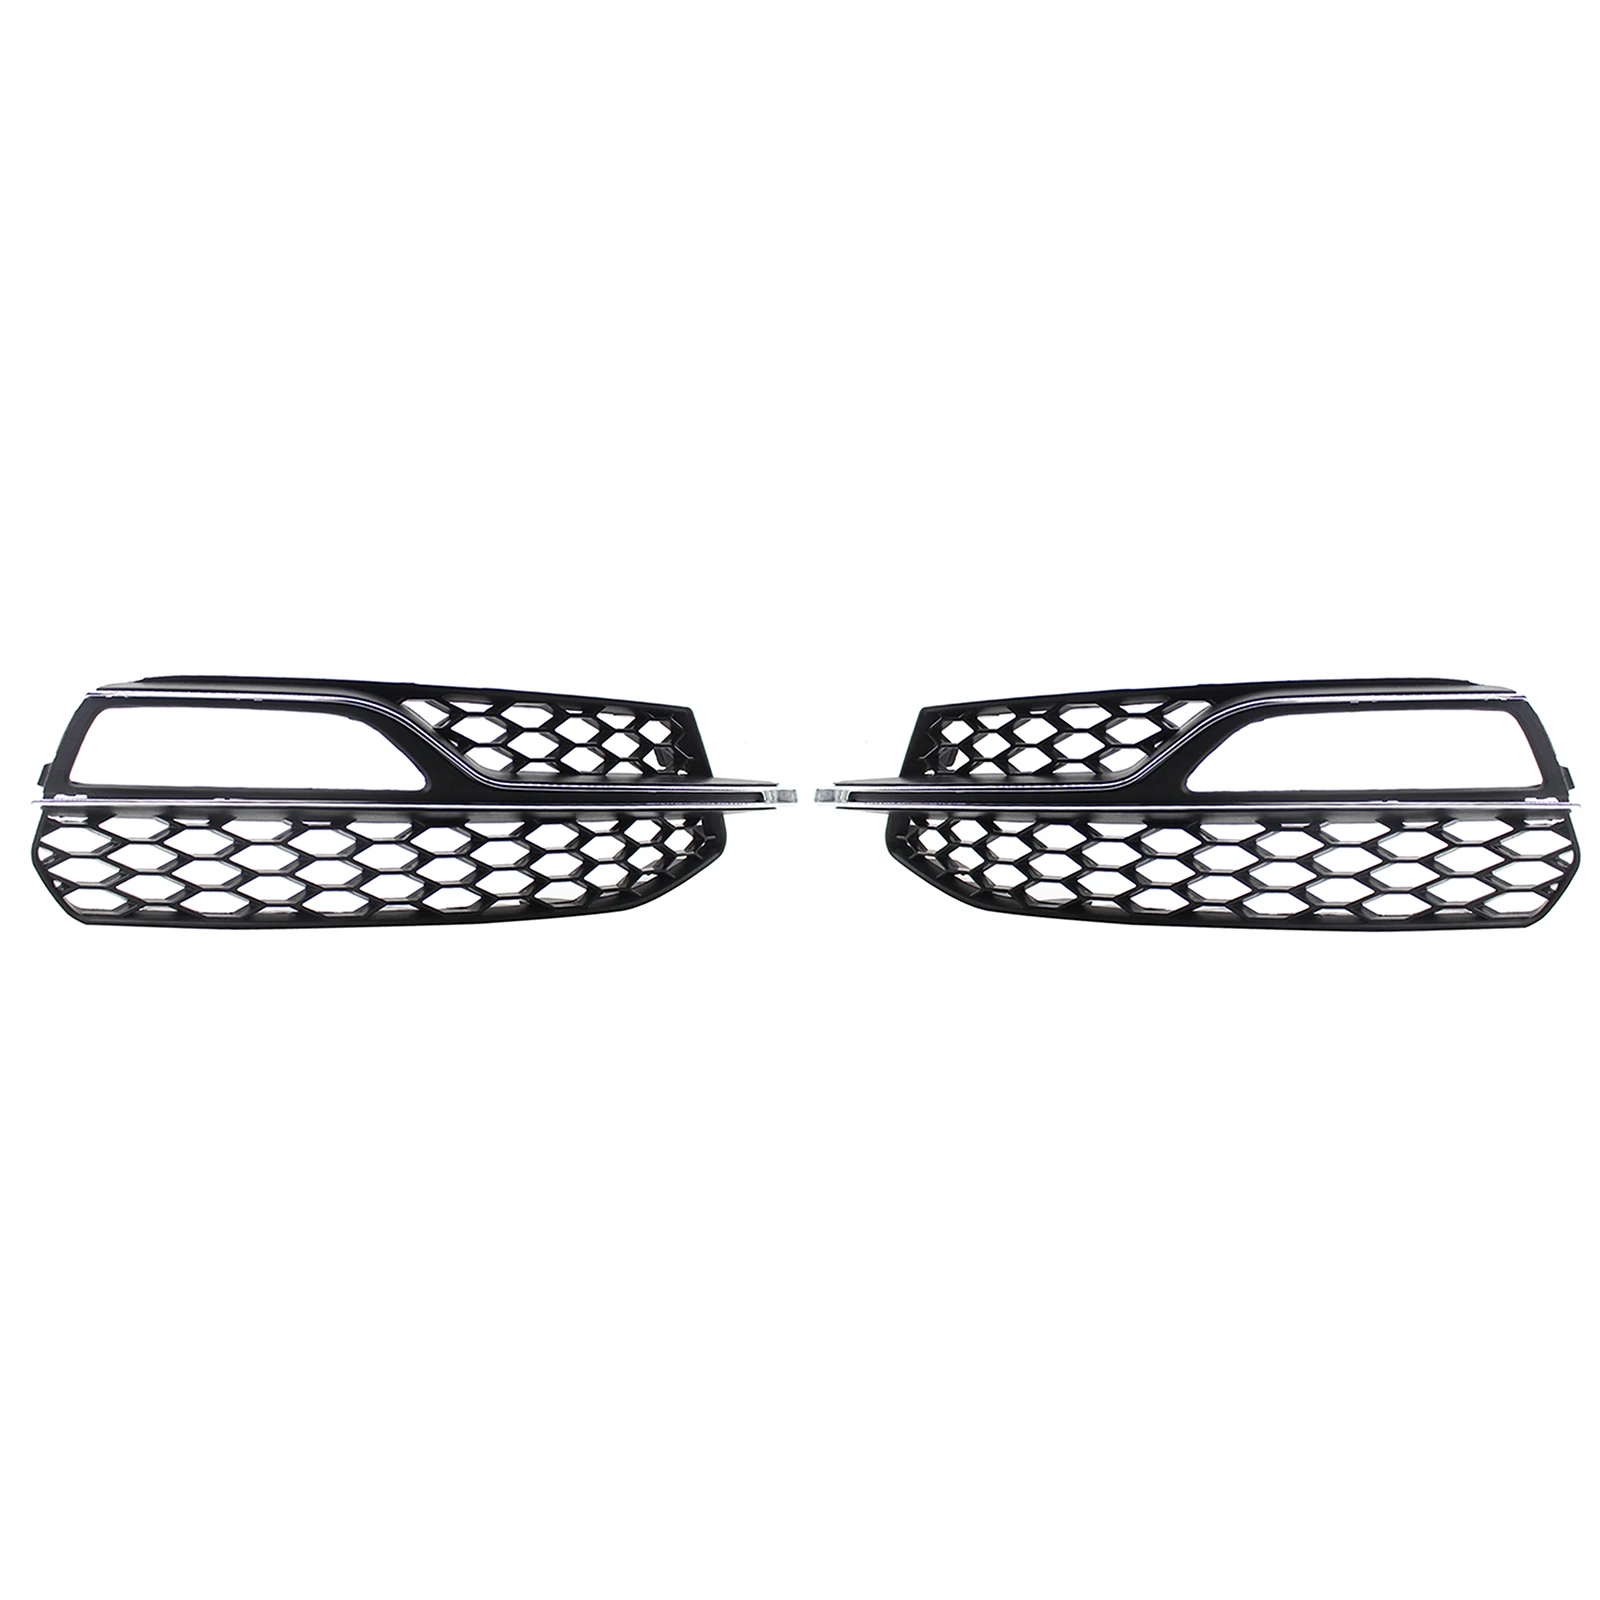 2x Front Fog Light Grilles fits for Audi A3 S3 13-17 Anti-scratch